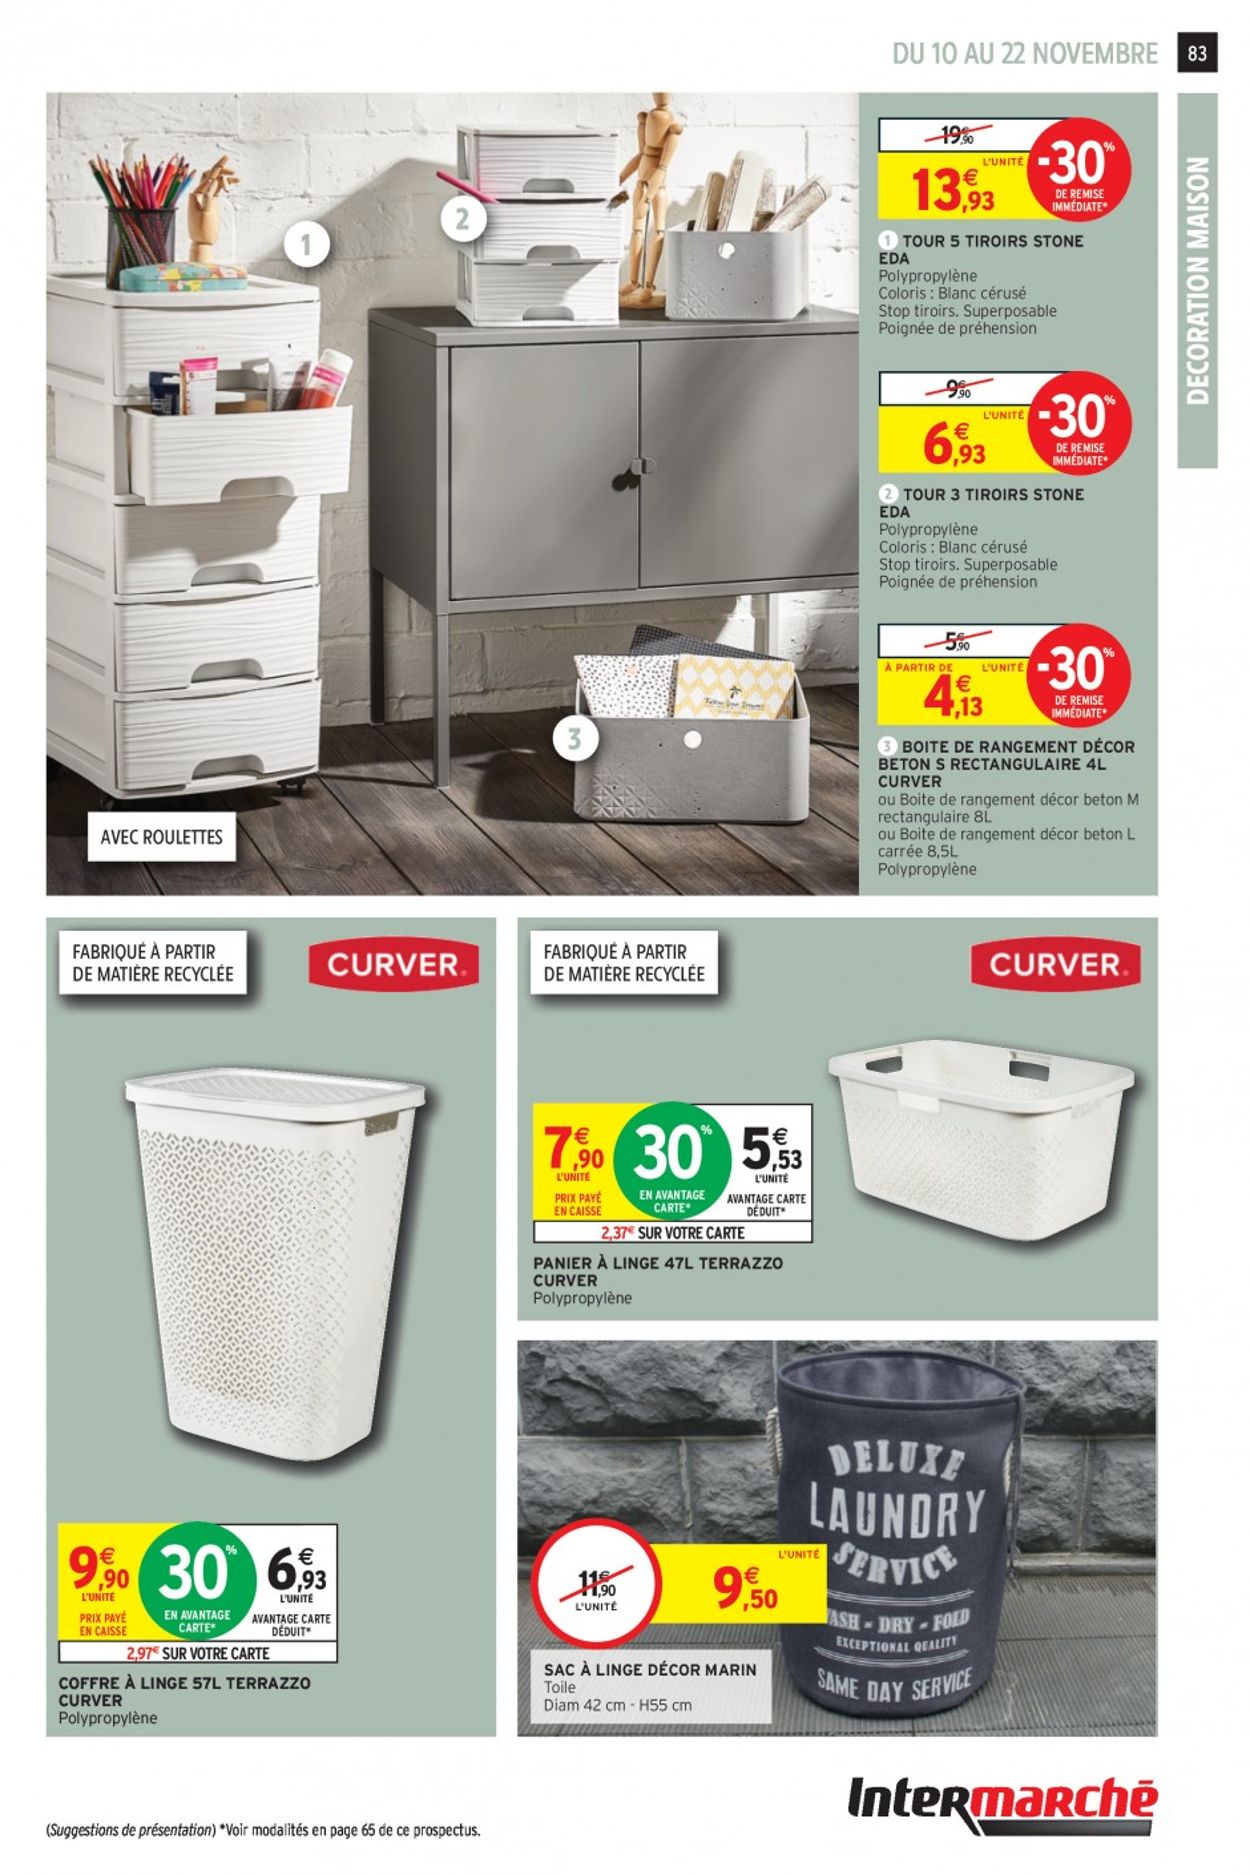 Intermarché Black Friday 2020 Catalogue - 10.11-22.11.2020 (Page 83)